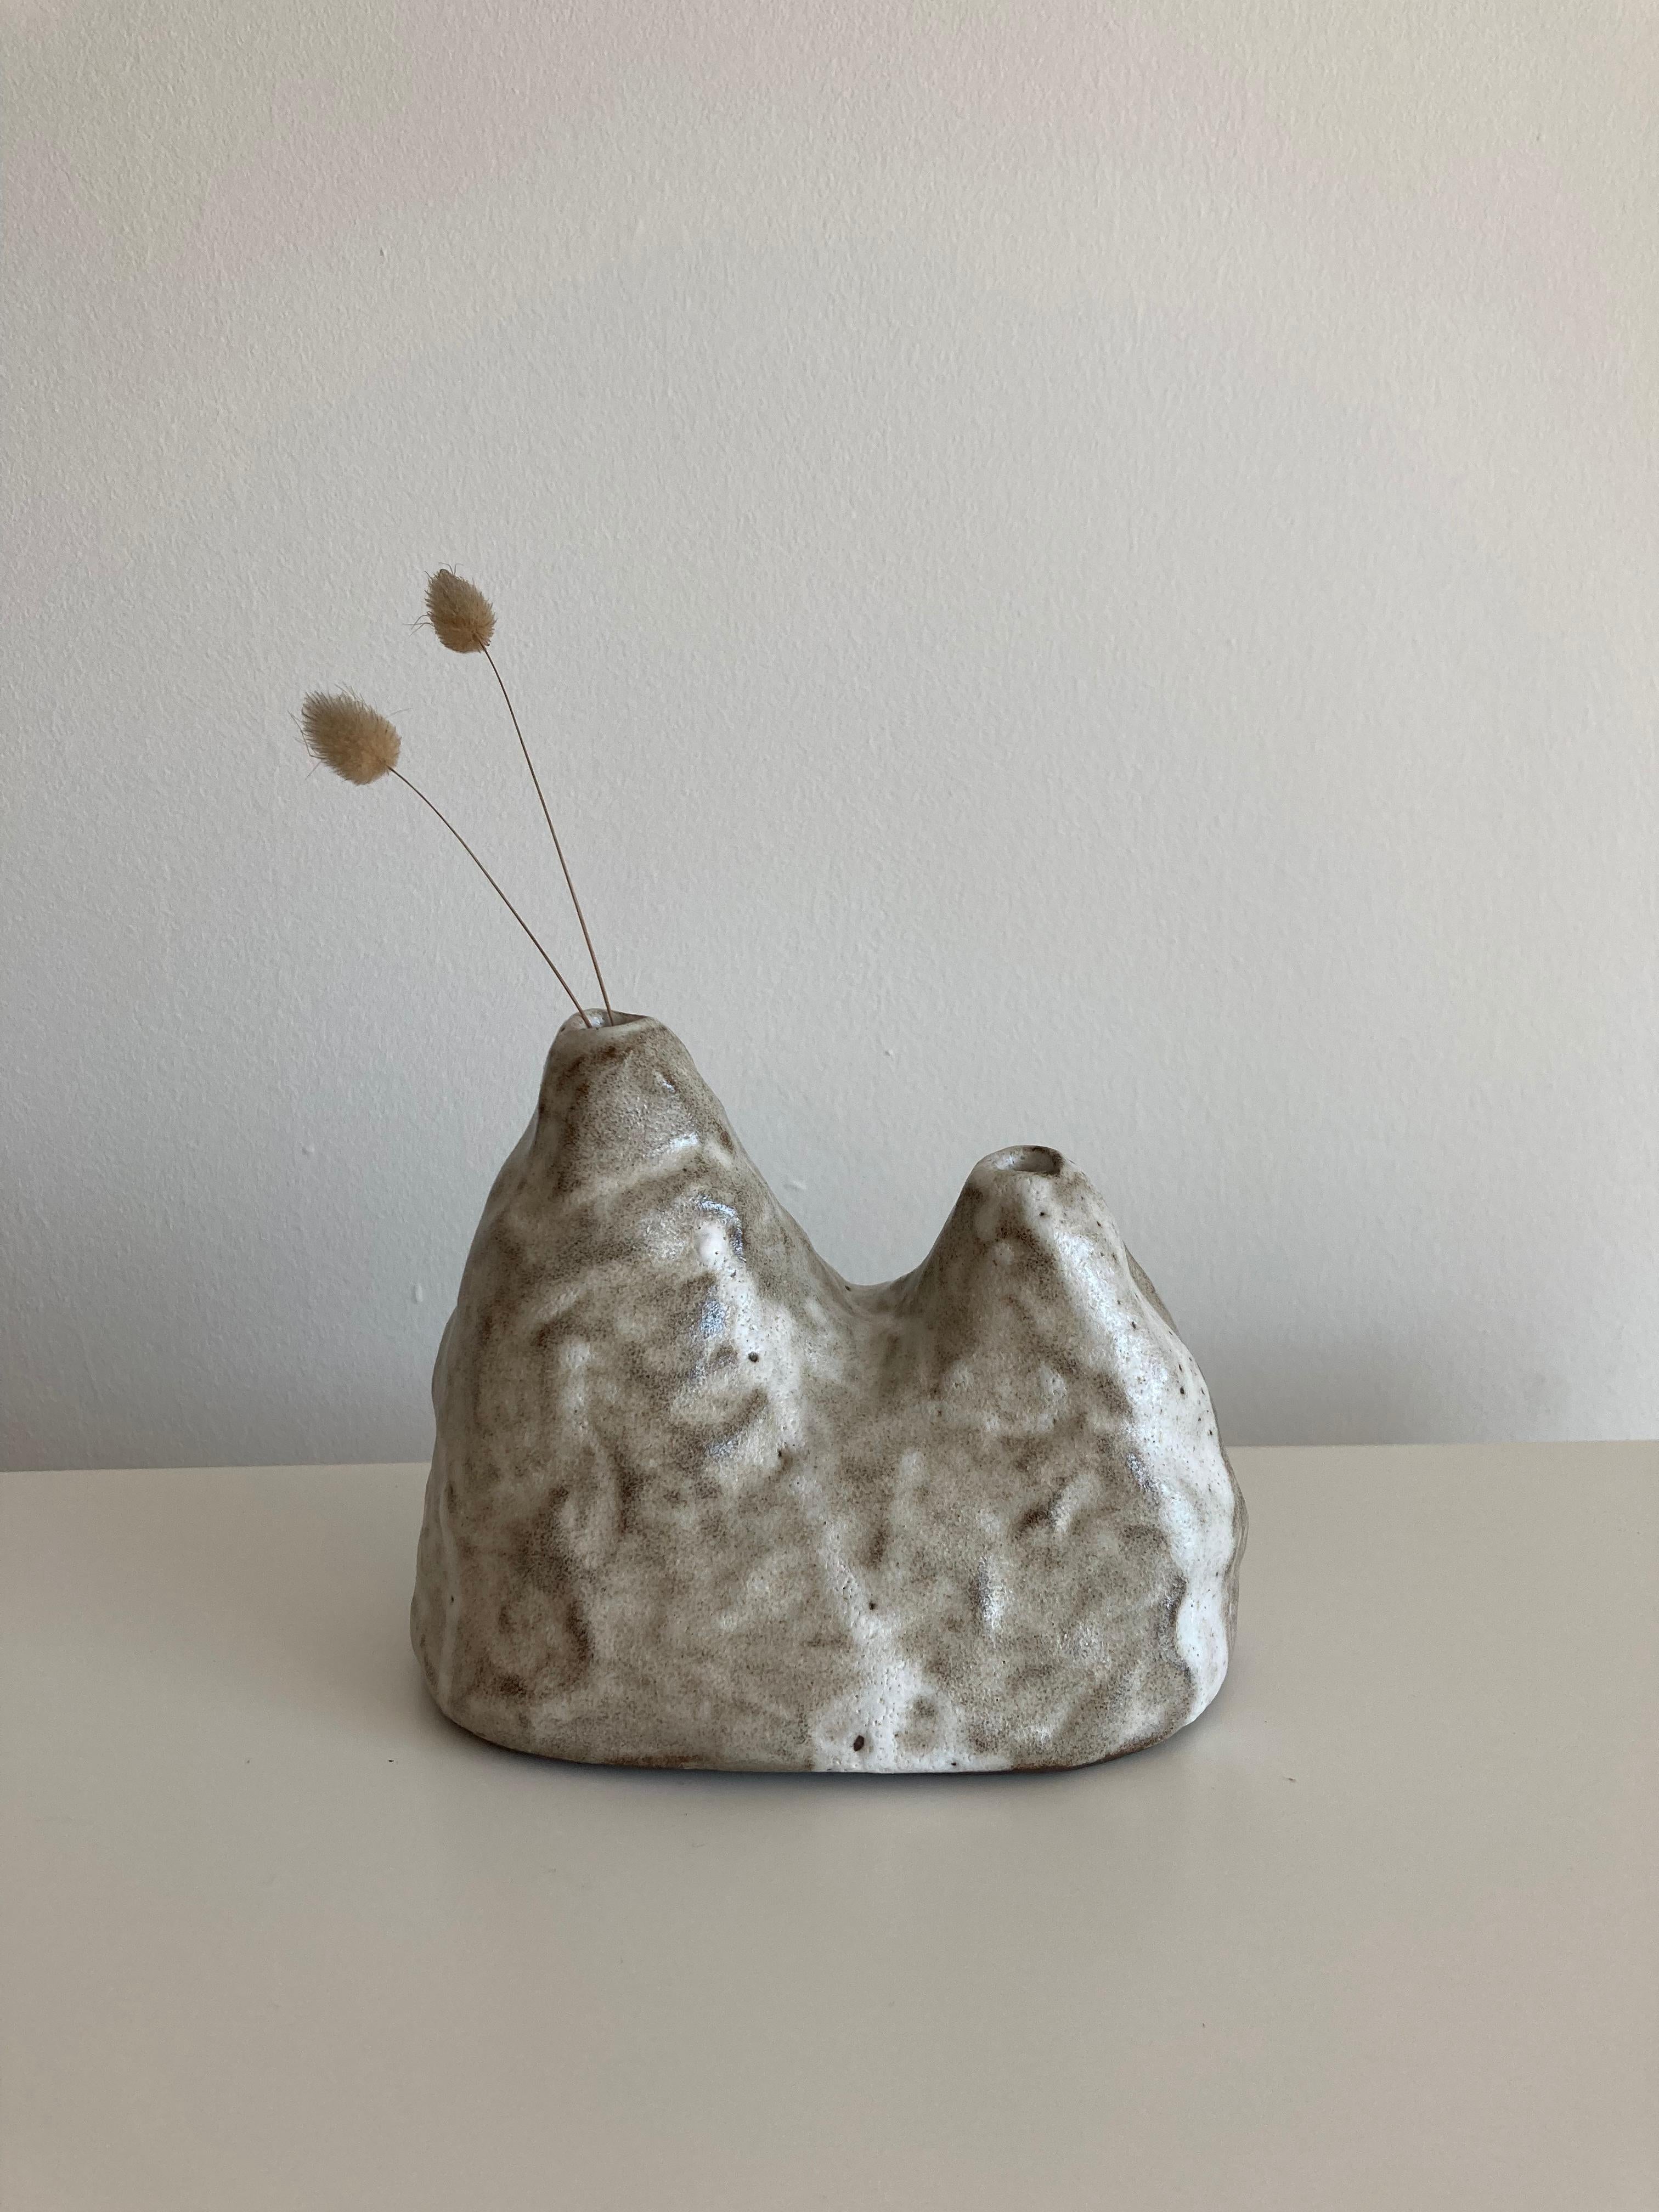 No.99 stoneware sculpture, tonfisk by Ciona Lee 
One of a kind
Dimensions: W 9 x H 12 cm
Materials: Black stoneware, frost white exterior.
Variations of size and colour available

Tonfisk is the ceramic practice by Ciona Lee, a Korean-Italian